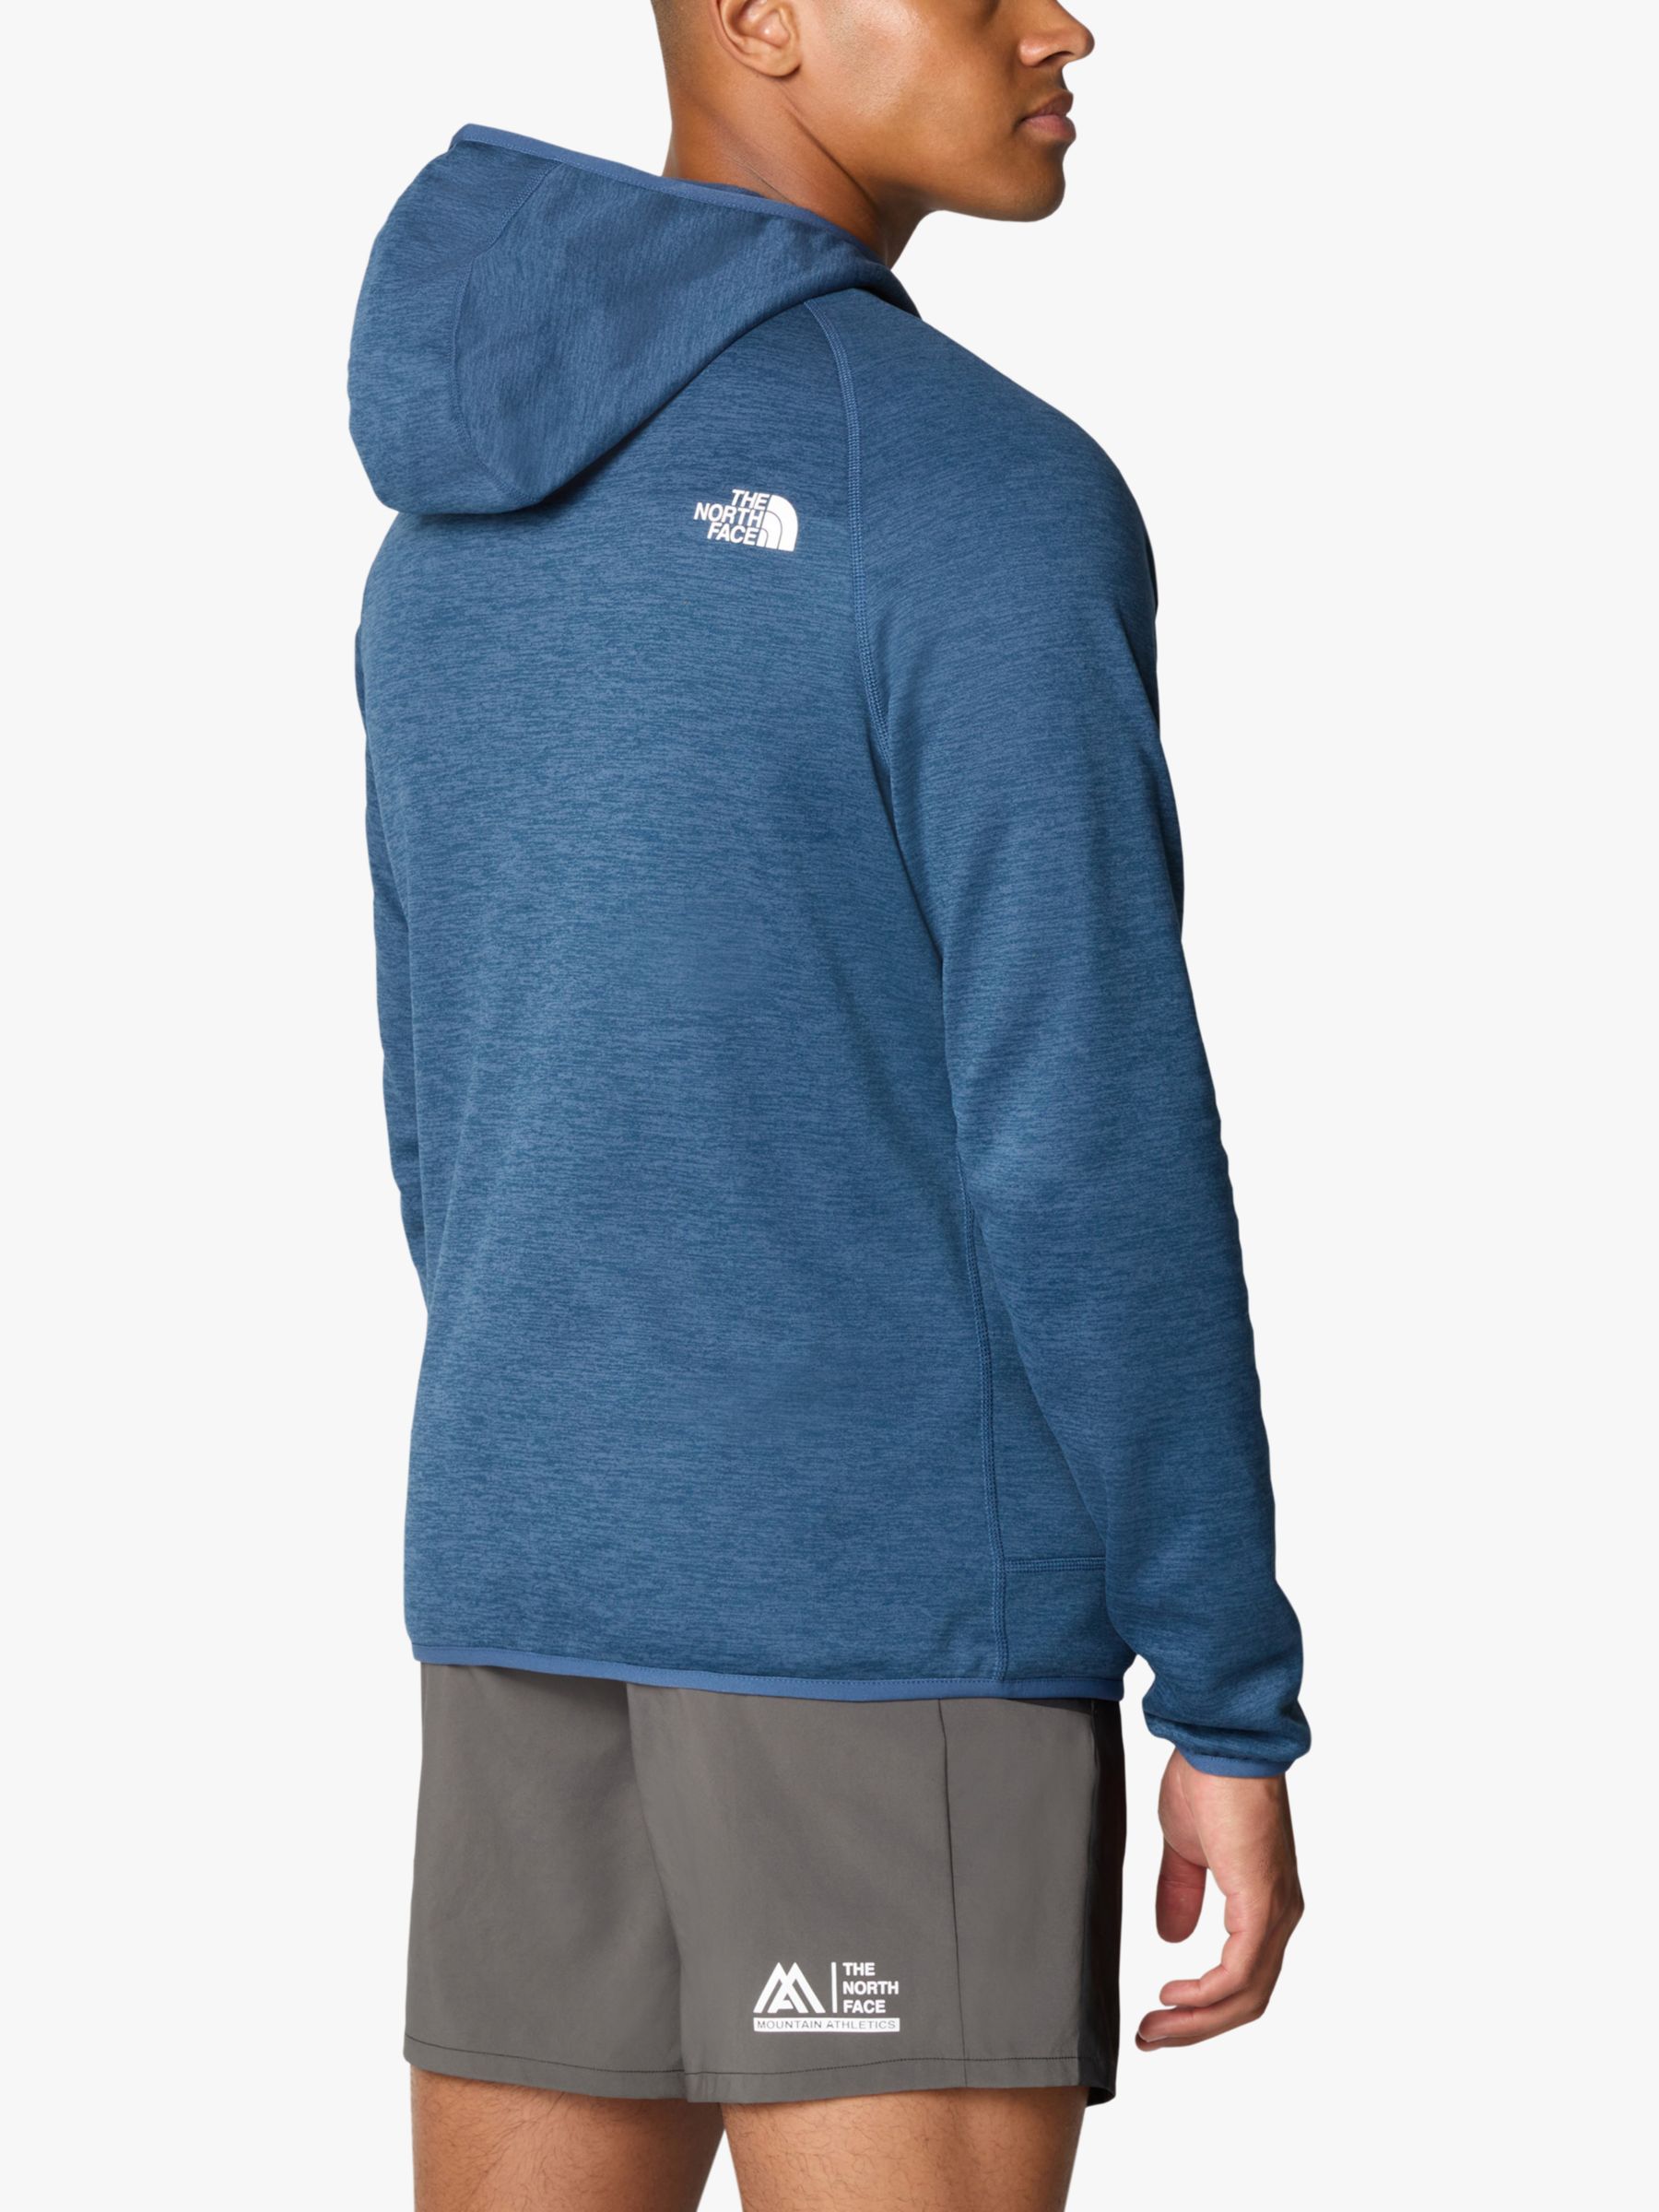 Buy The North Face Canyonlands Hooded Fleece Jacket, Blue Heather Online at johnlewis.com